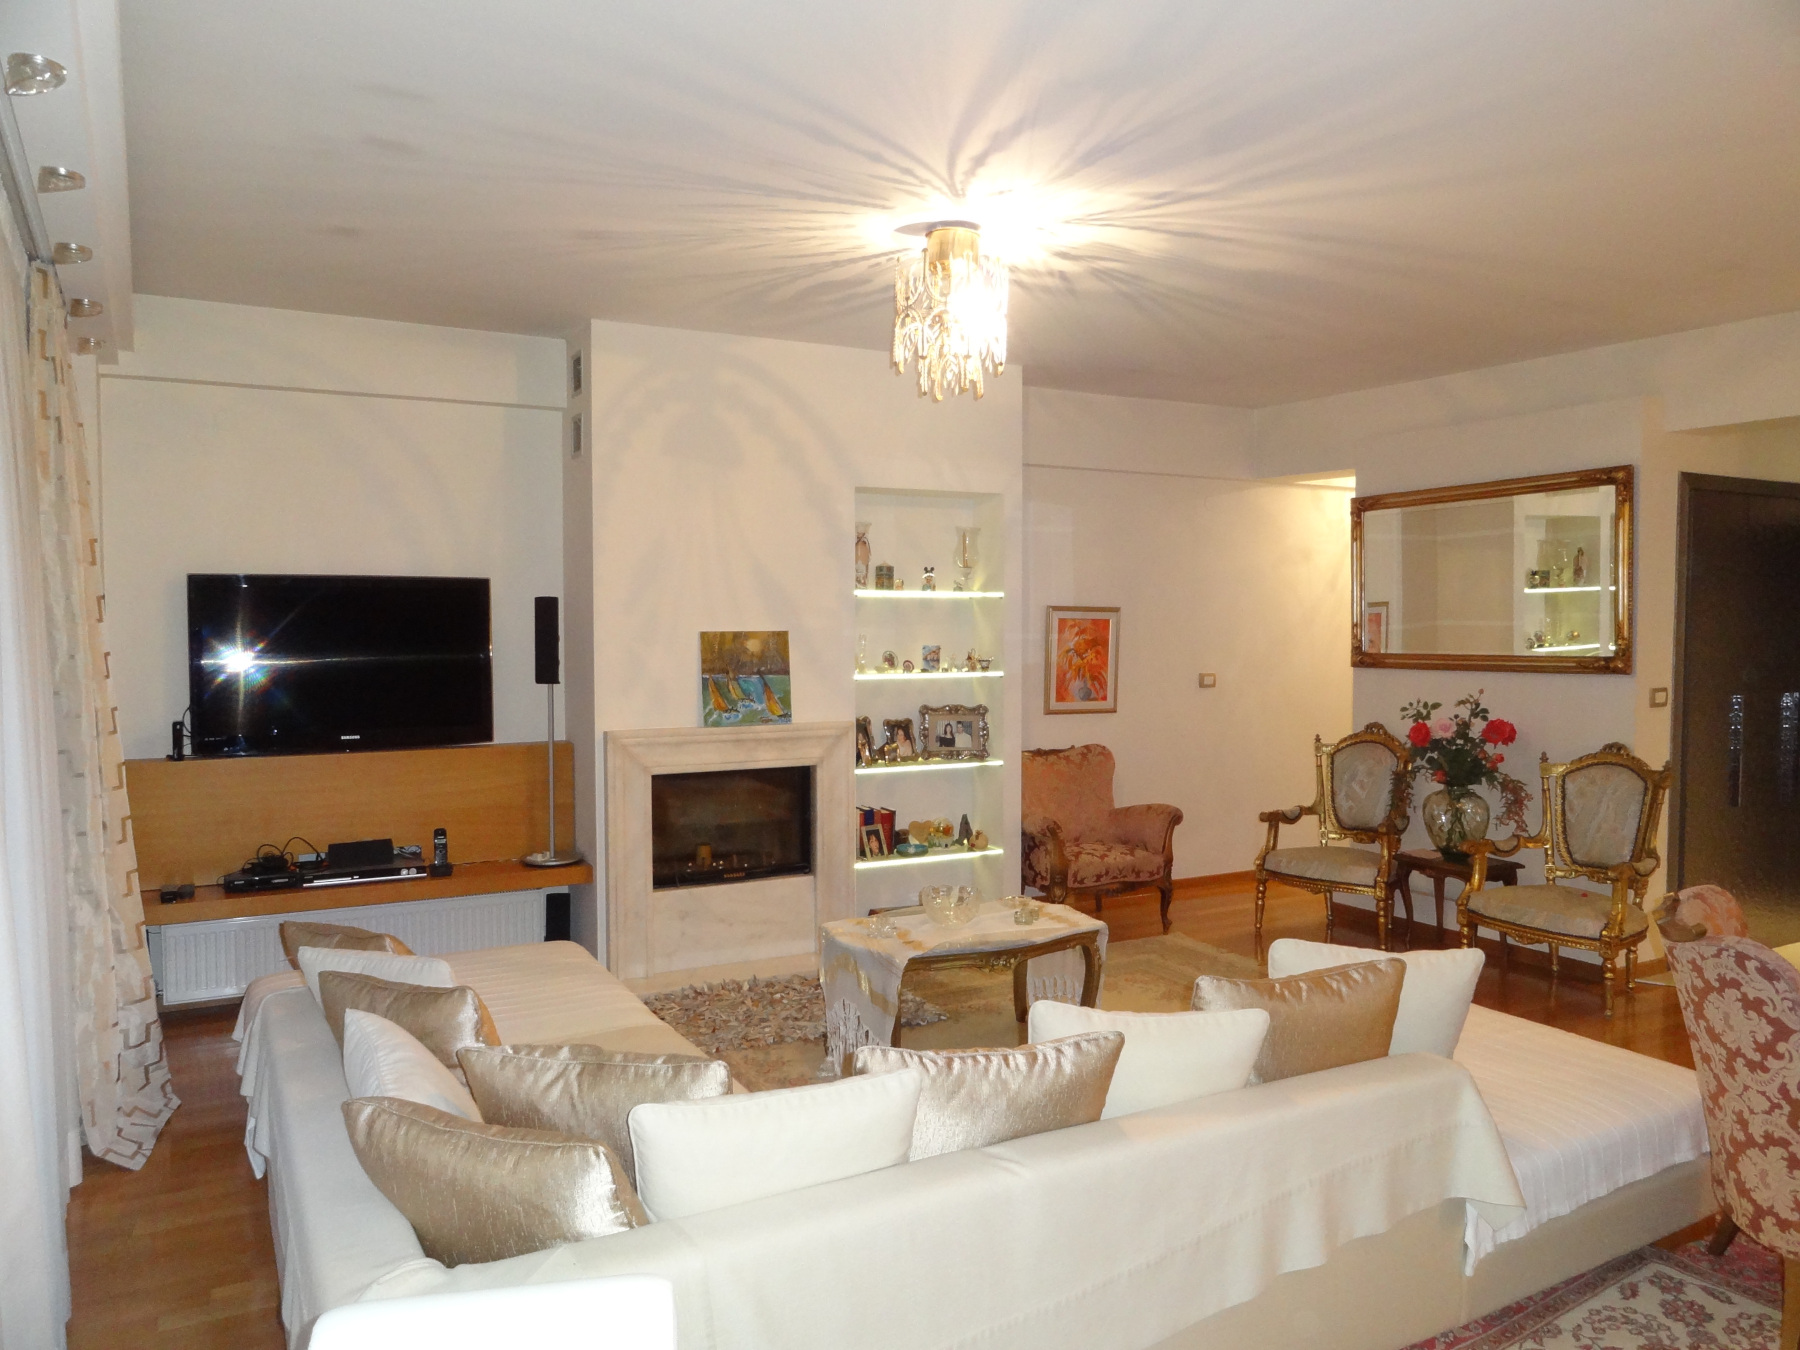 For sale maisonette 138 sq.m. three bedroom 4th and 5th floor, built in 2012 in the area of Alsus in Ioannina